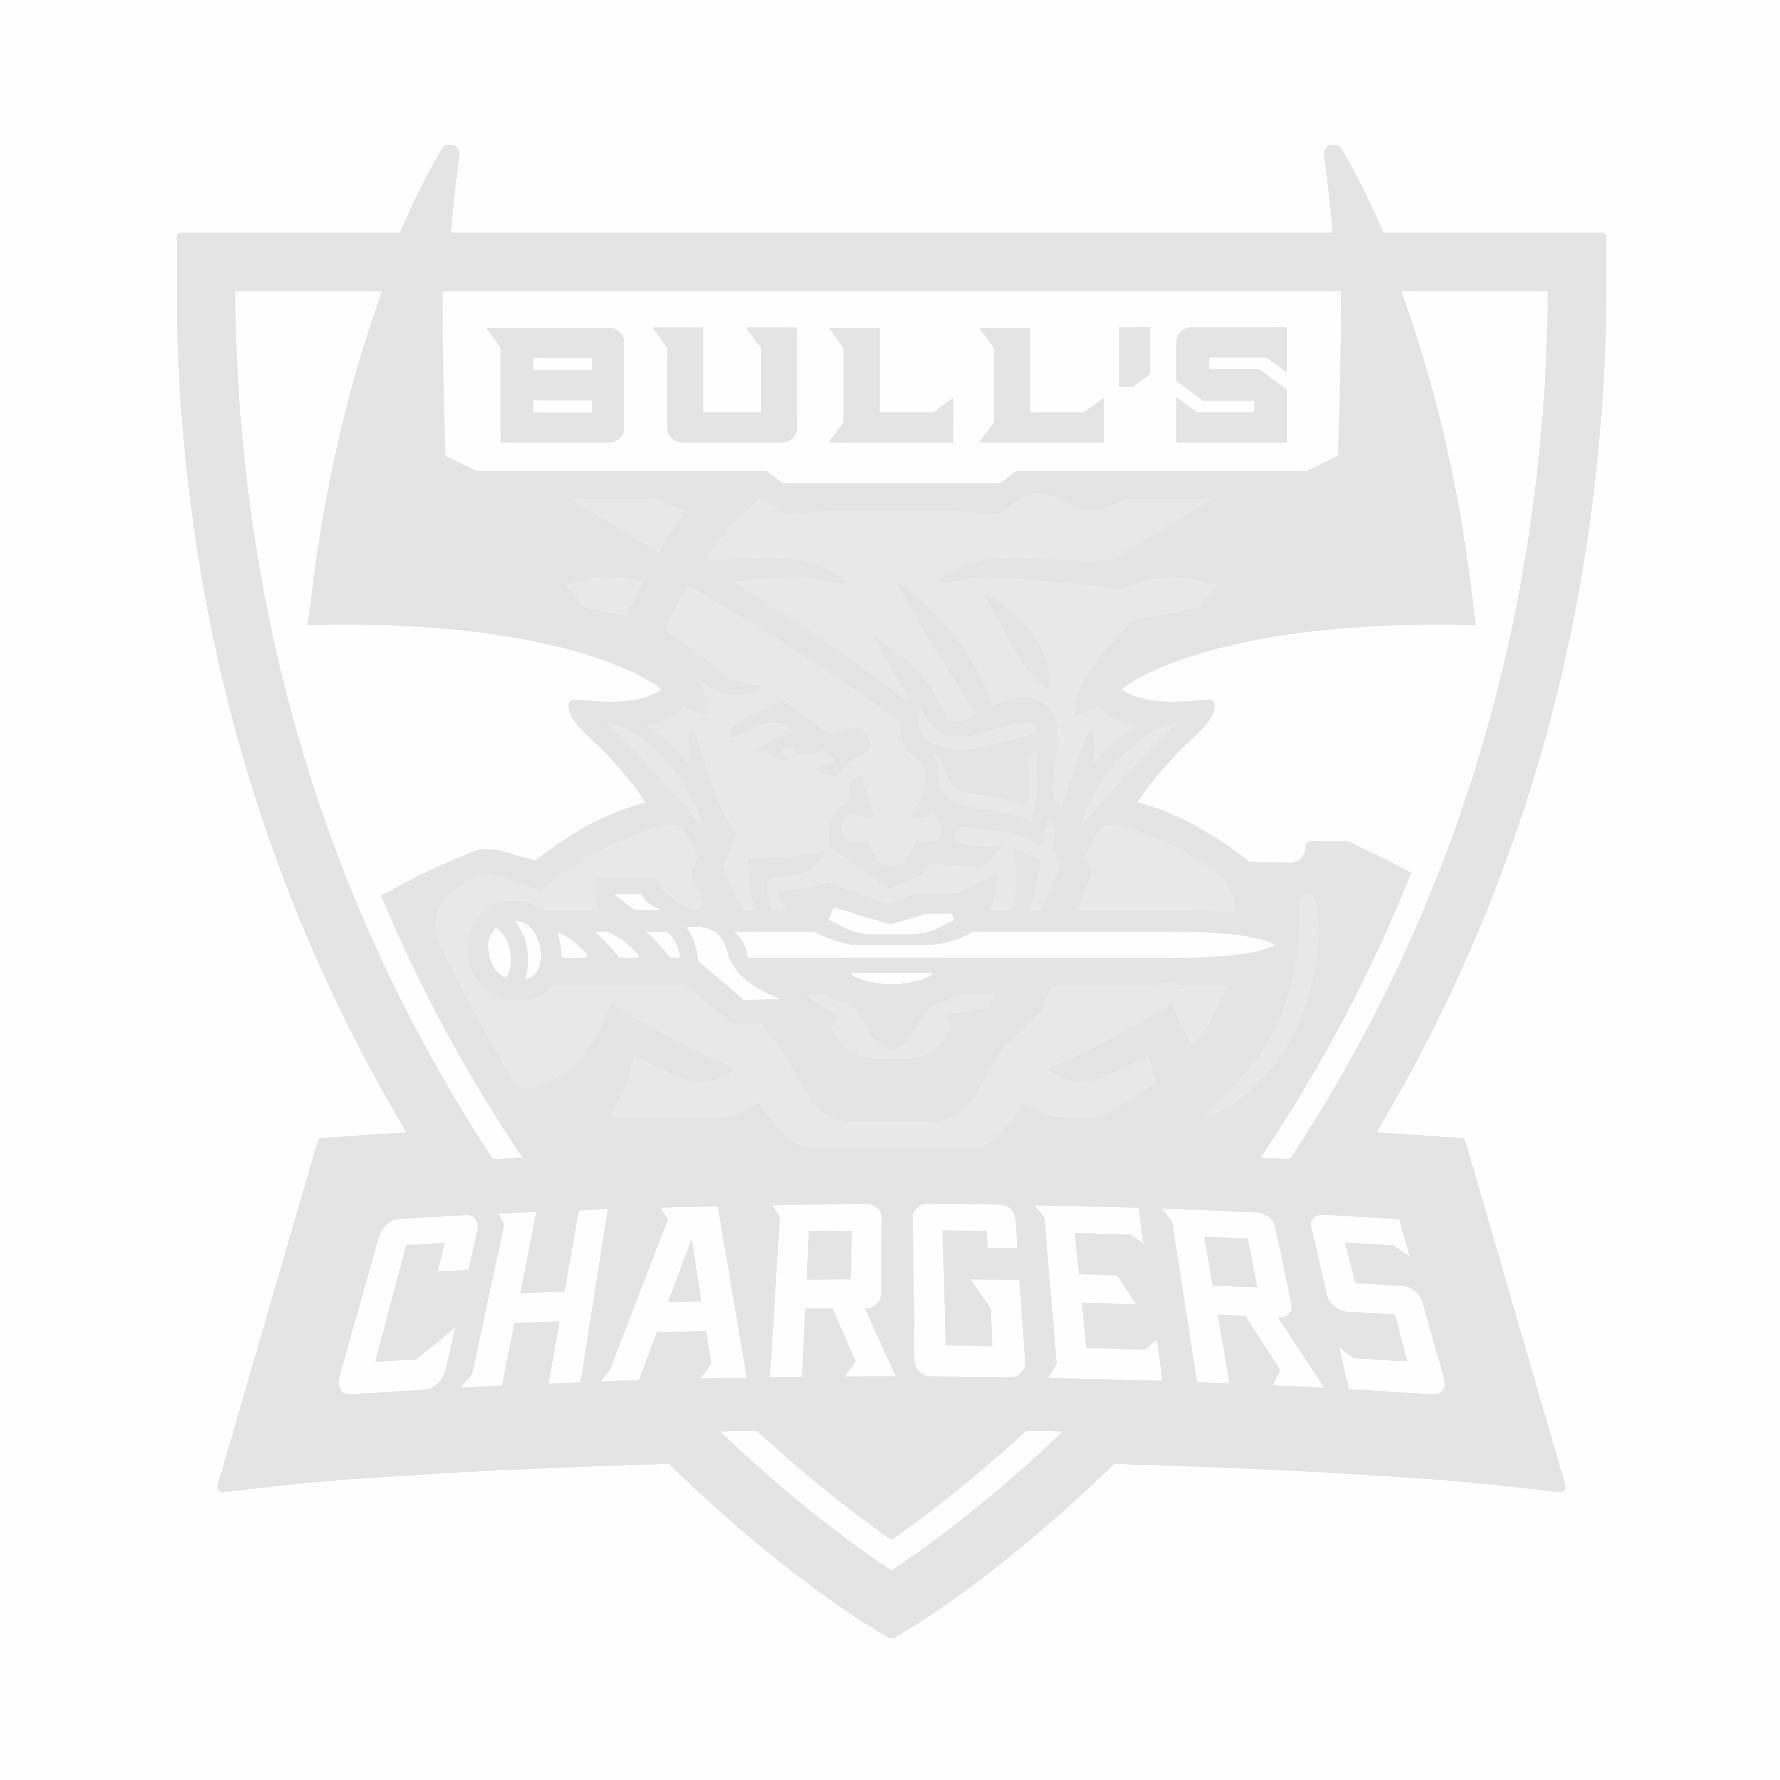 The emblem of the Chargers.